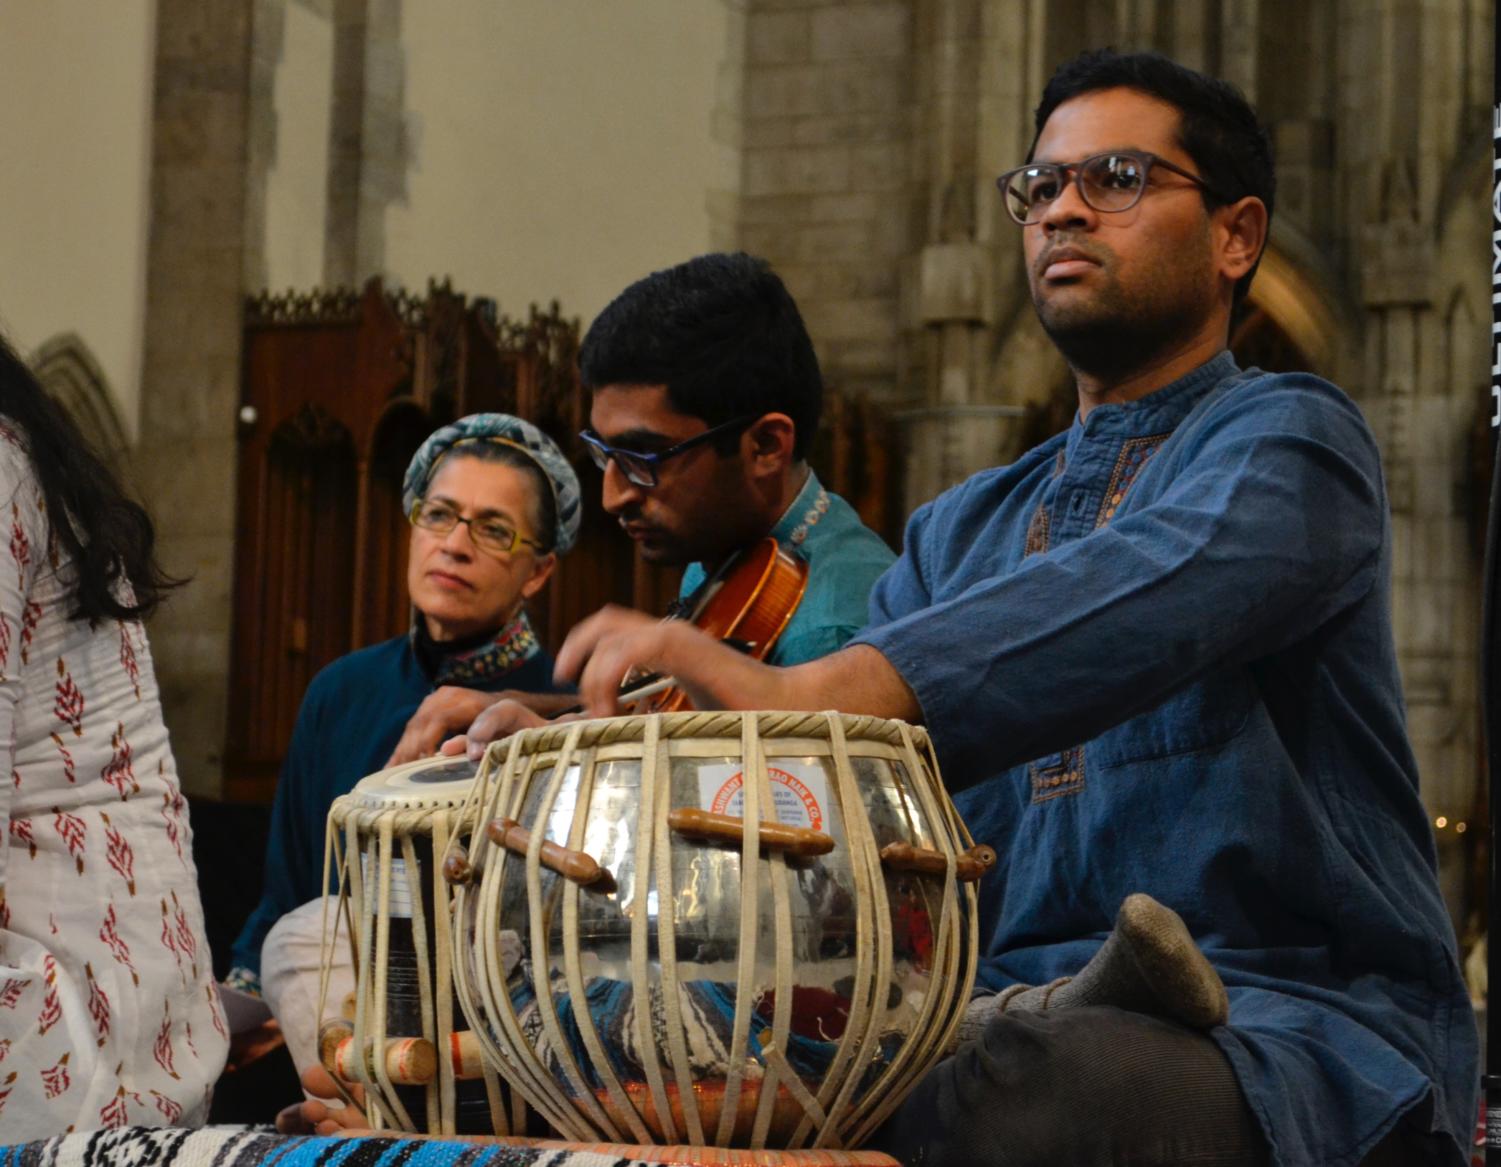 A member of the South Asian Musical Ensemble plays the tabla, a percussion instrument used in Hindustani classical music.